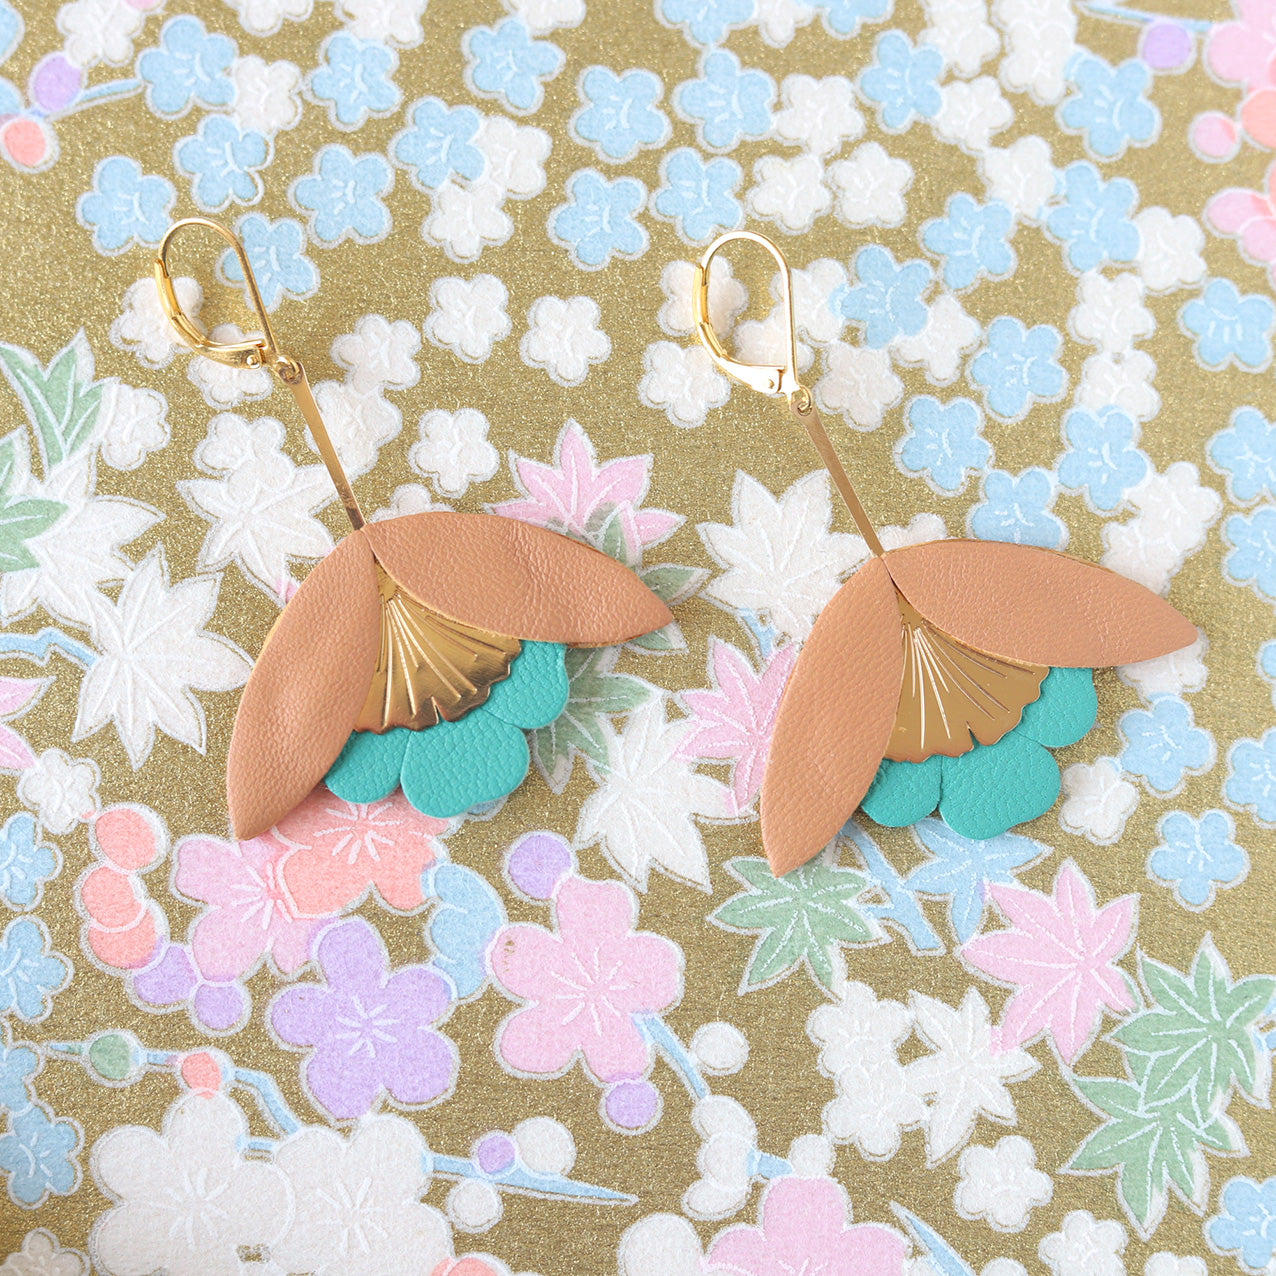 Ginkgo Flower earrings in aurora yellow and turquoise blue leather